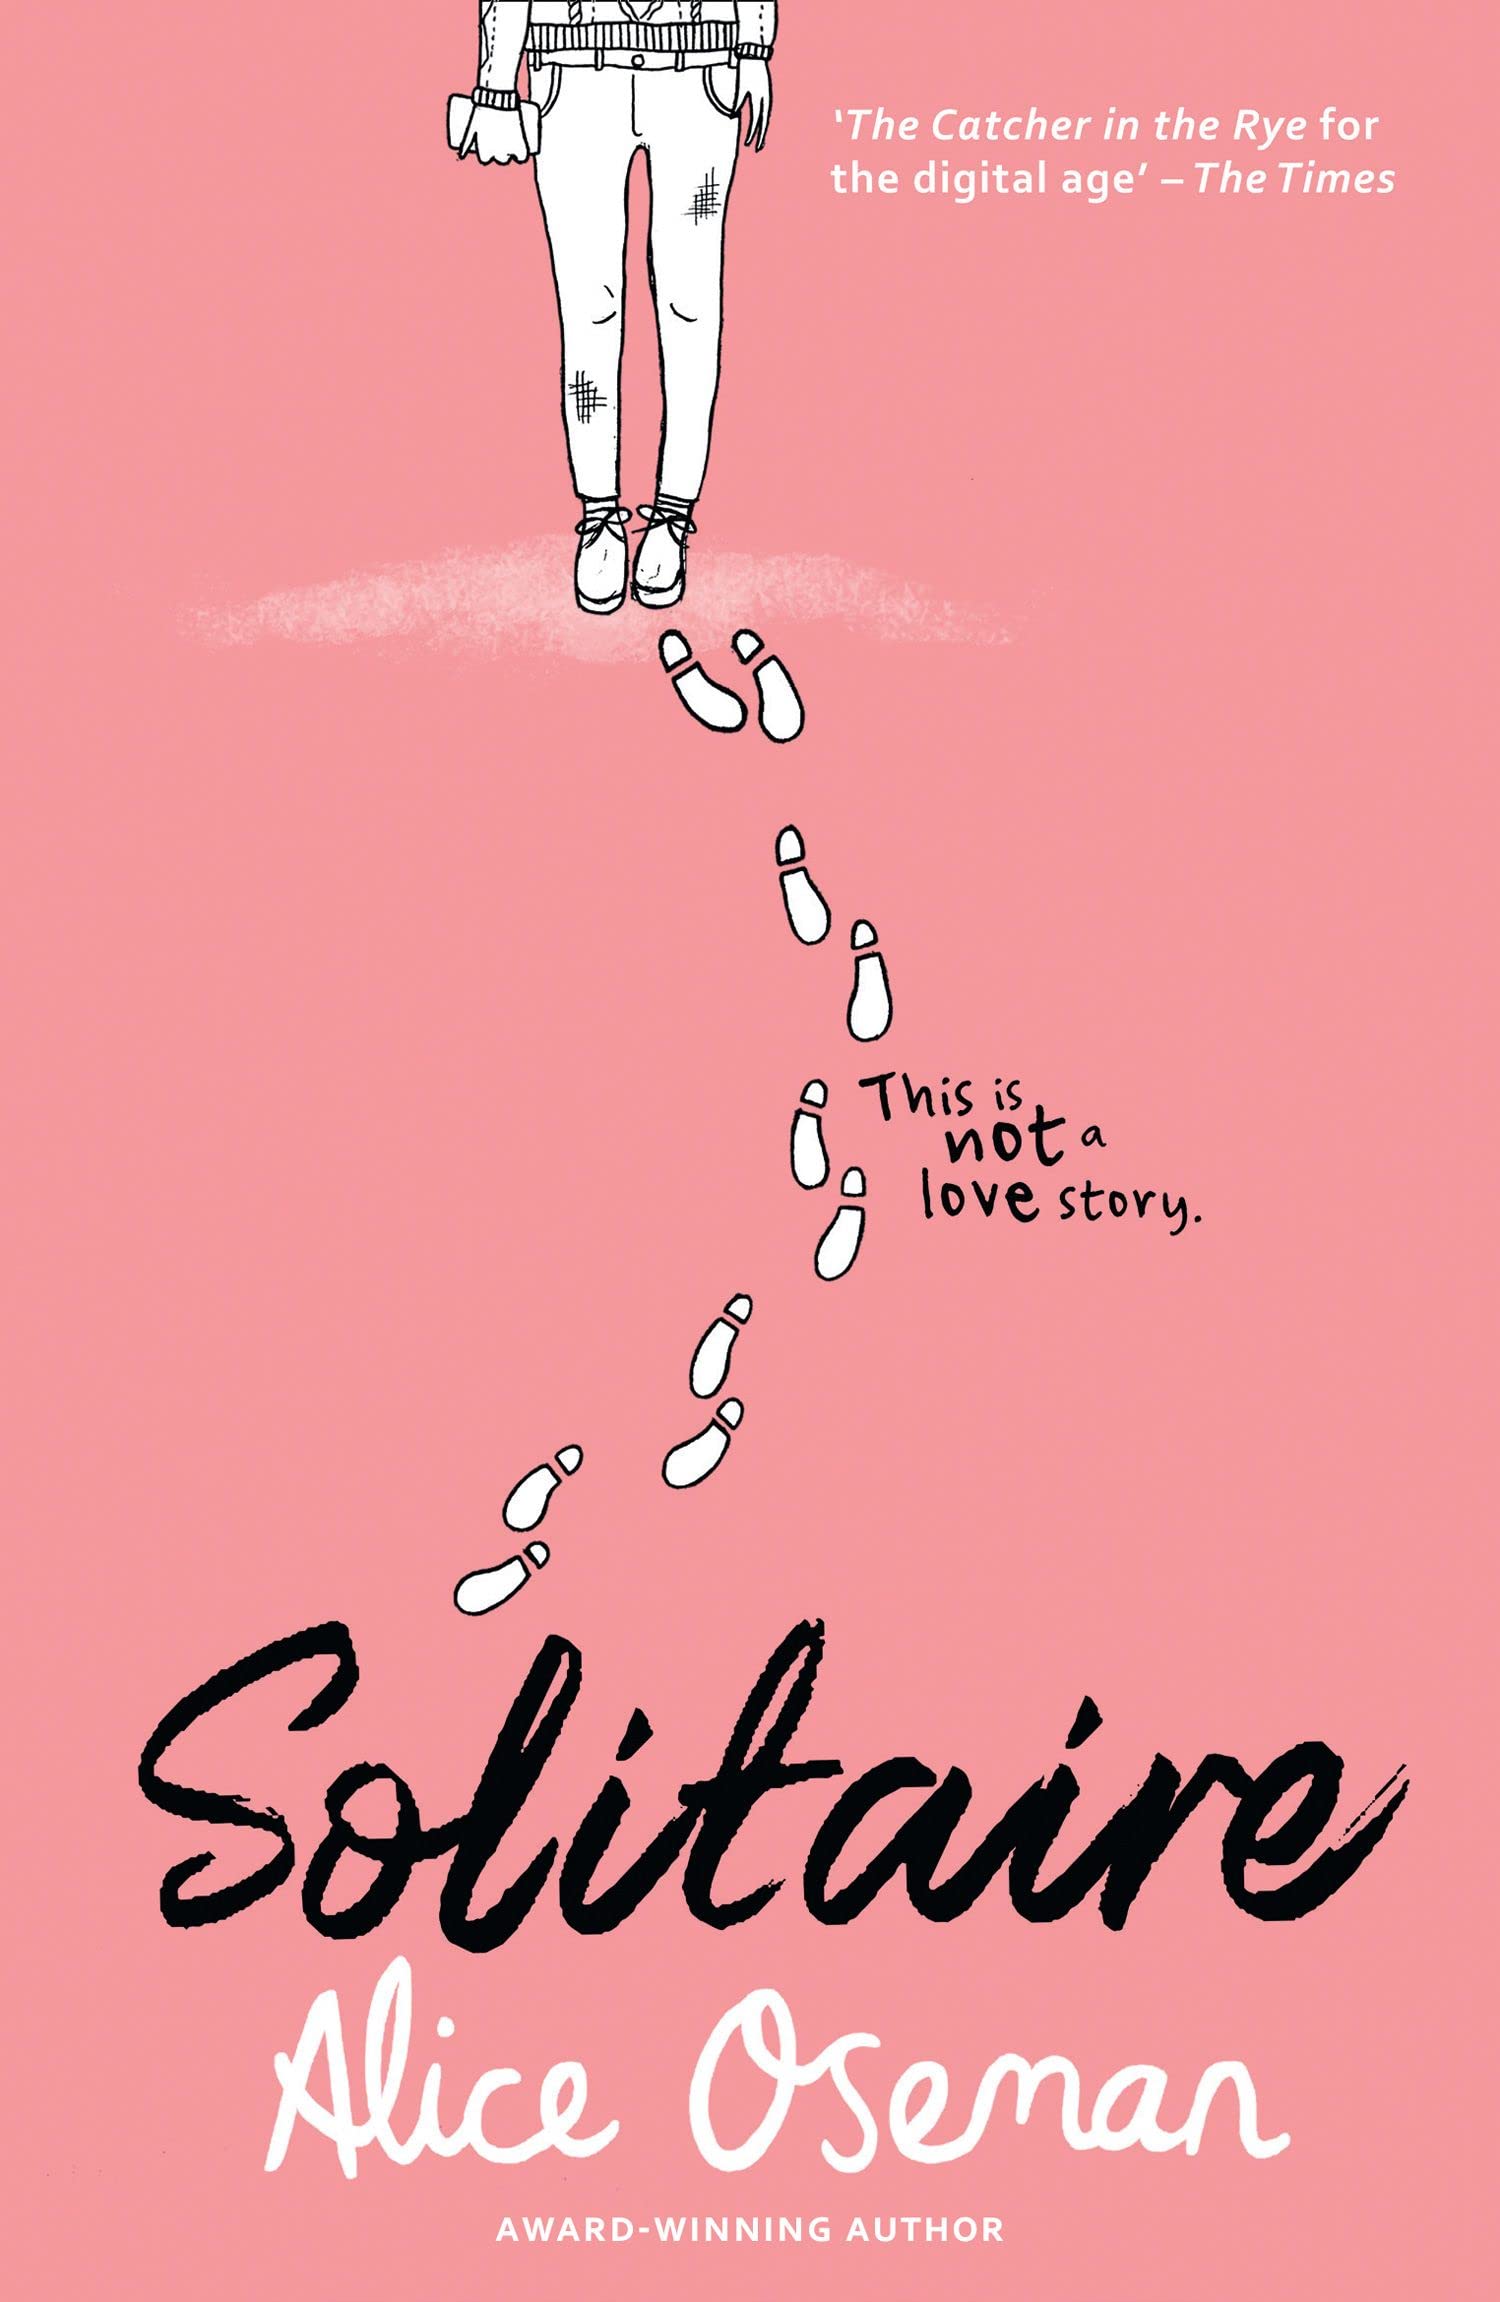 solitaire-by-alice-oseman-book-summary